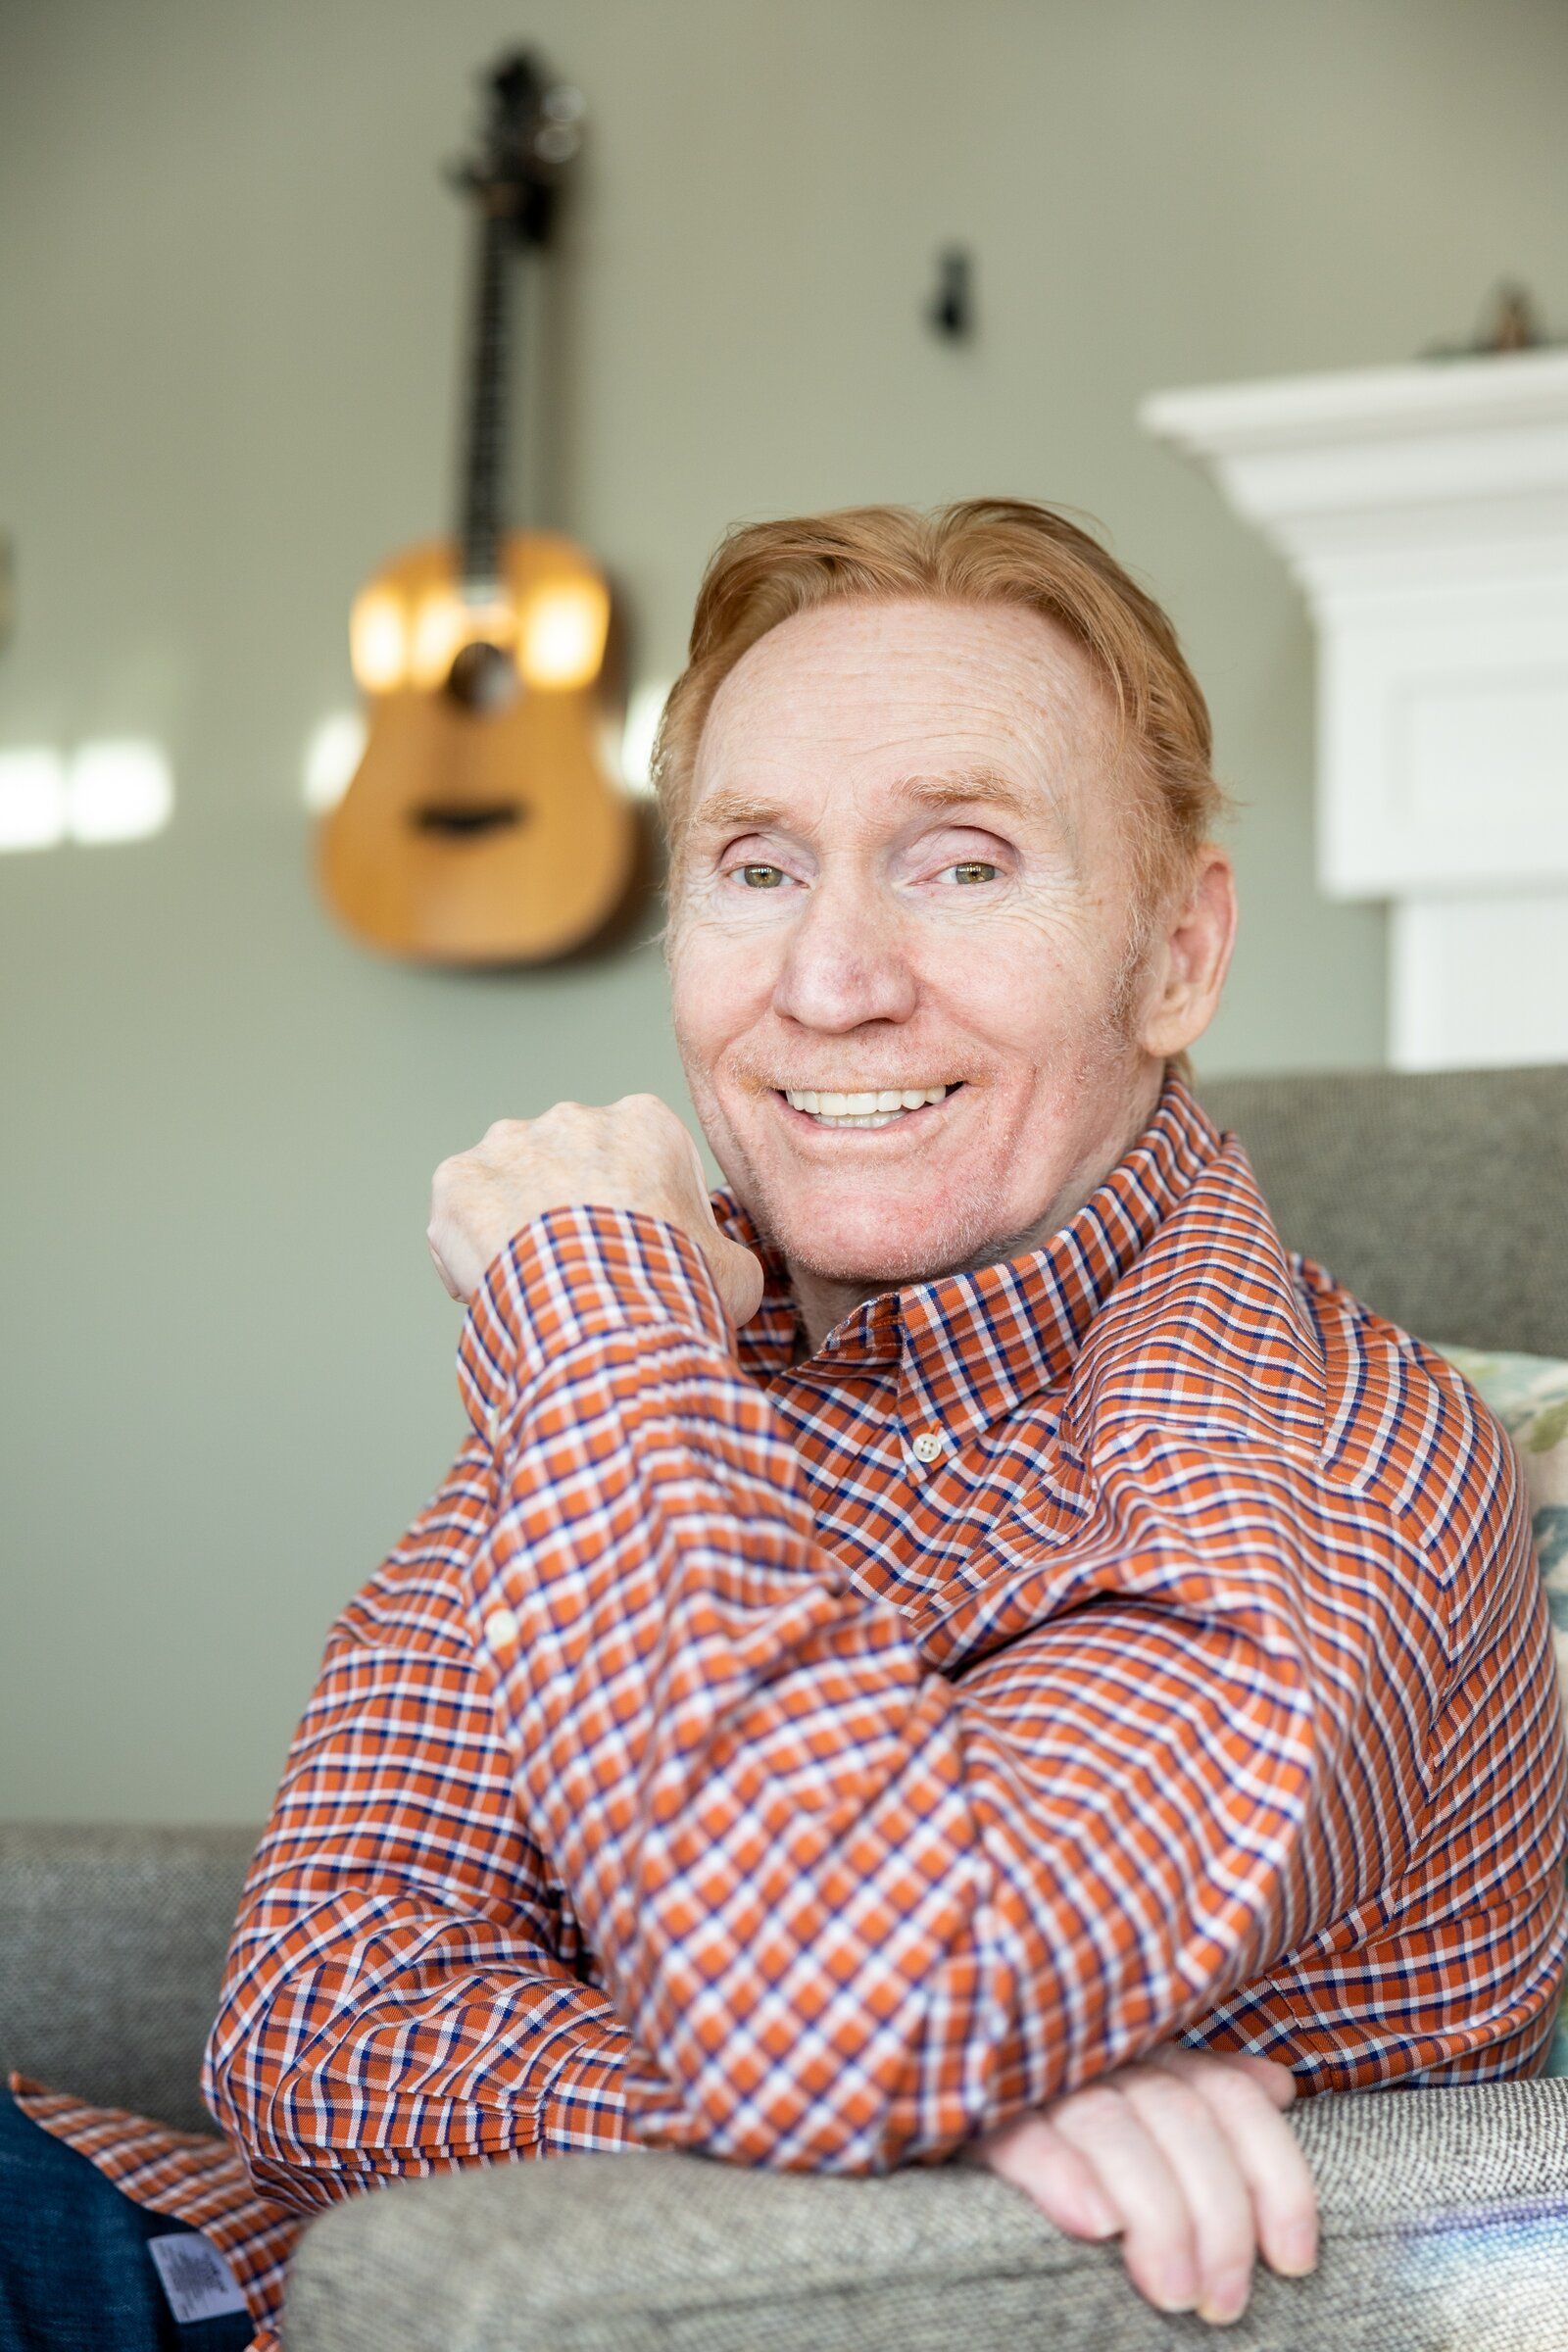 After childhood fame — and decades of infamy — Danny Bonaduce finds success and sobriety in Seattle The Seattle Times